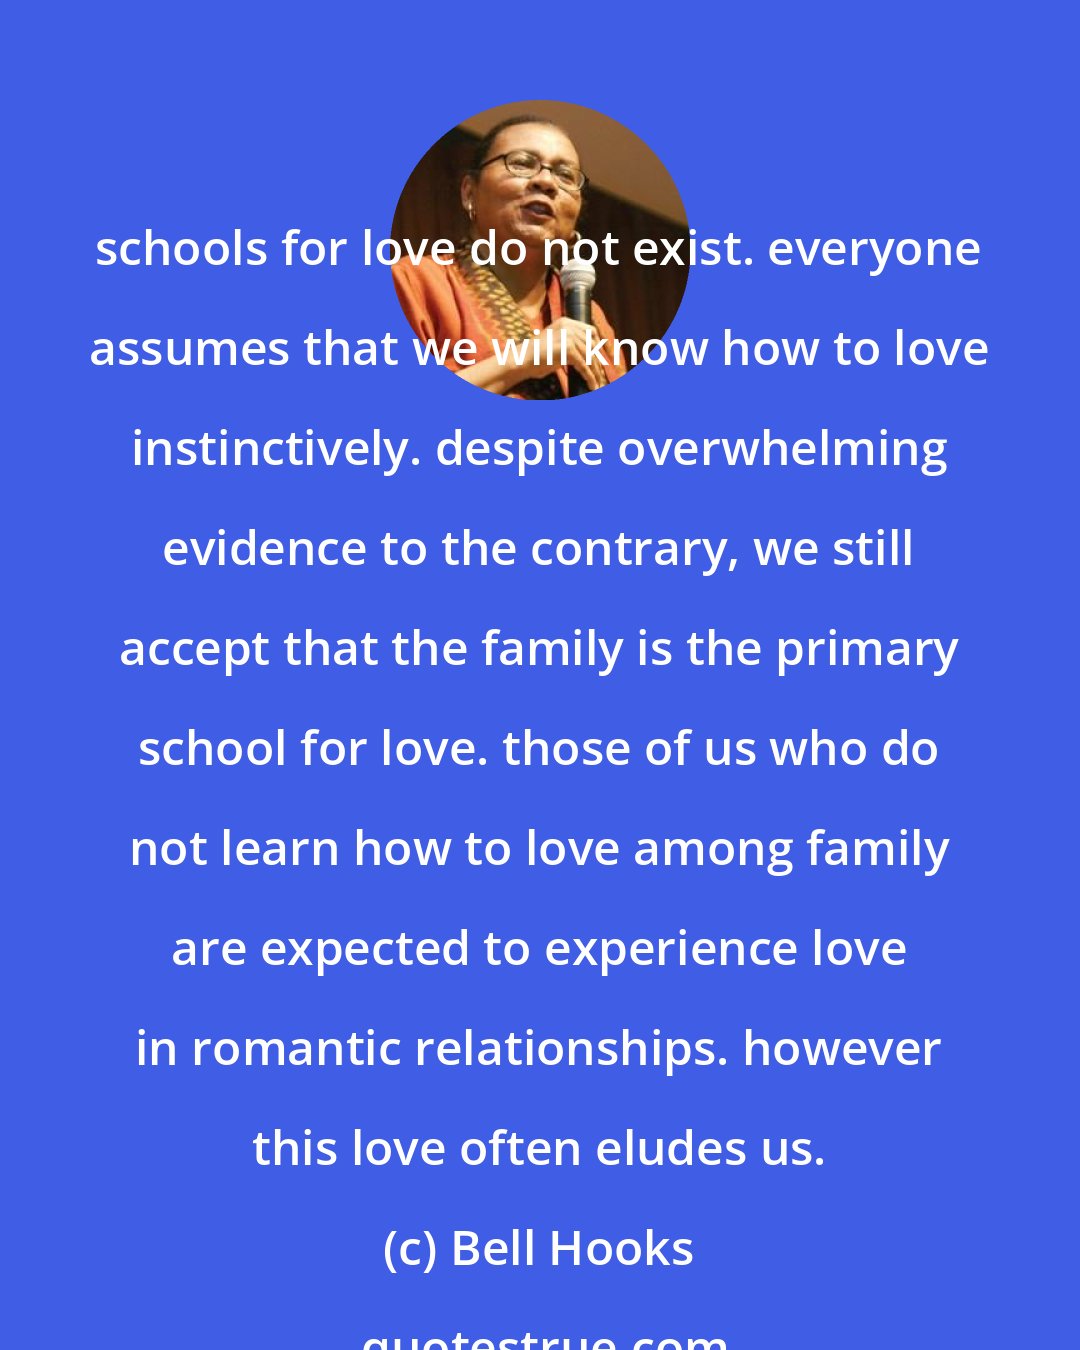 Bell Hooks: schools for love do not exist. everyone assumes that we will know how to love instinctively. despite overwhelming evidence to the contrary, we still accept that the family is the primary school for love. those of us who do not learn how to love among family are expected to experience love in romantic relationships. however this love often eludes us.